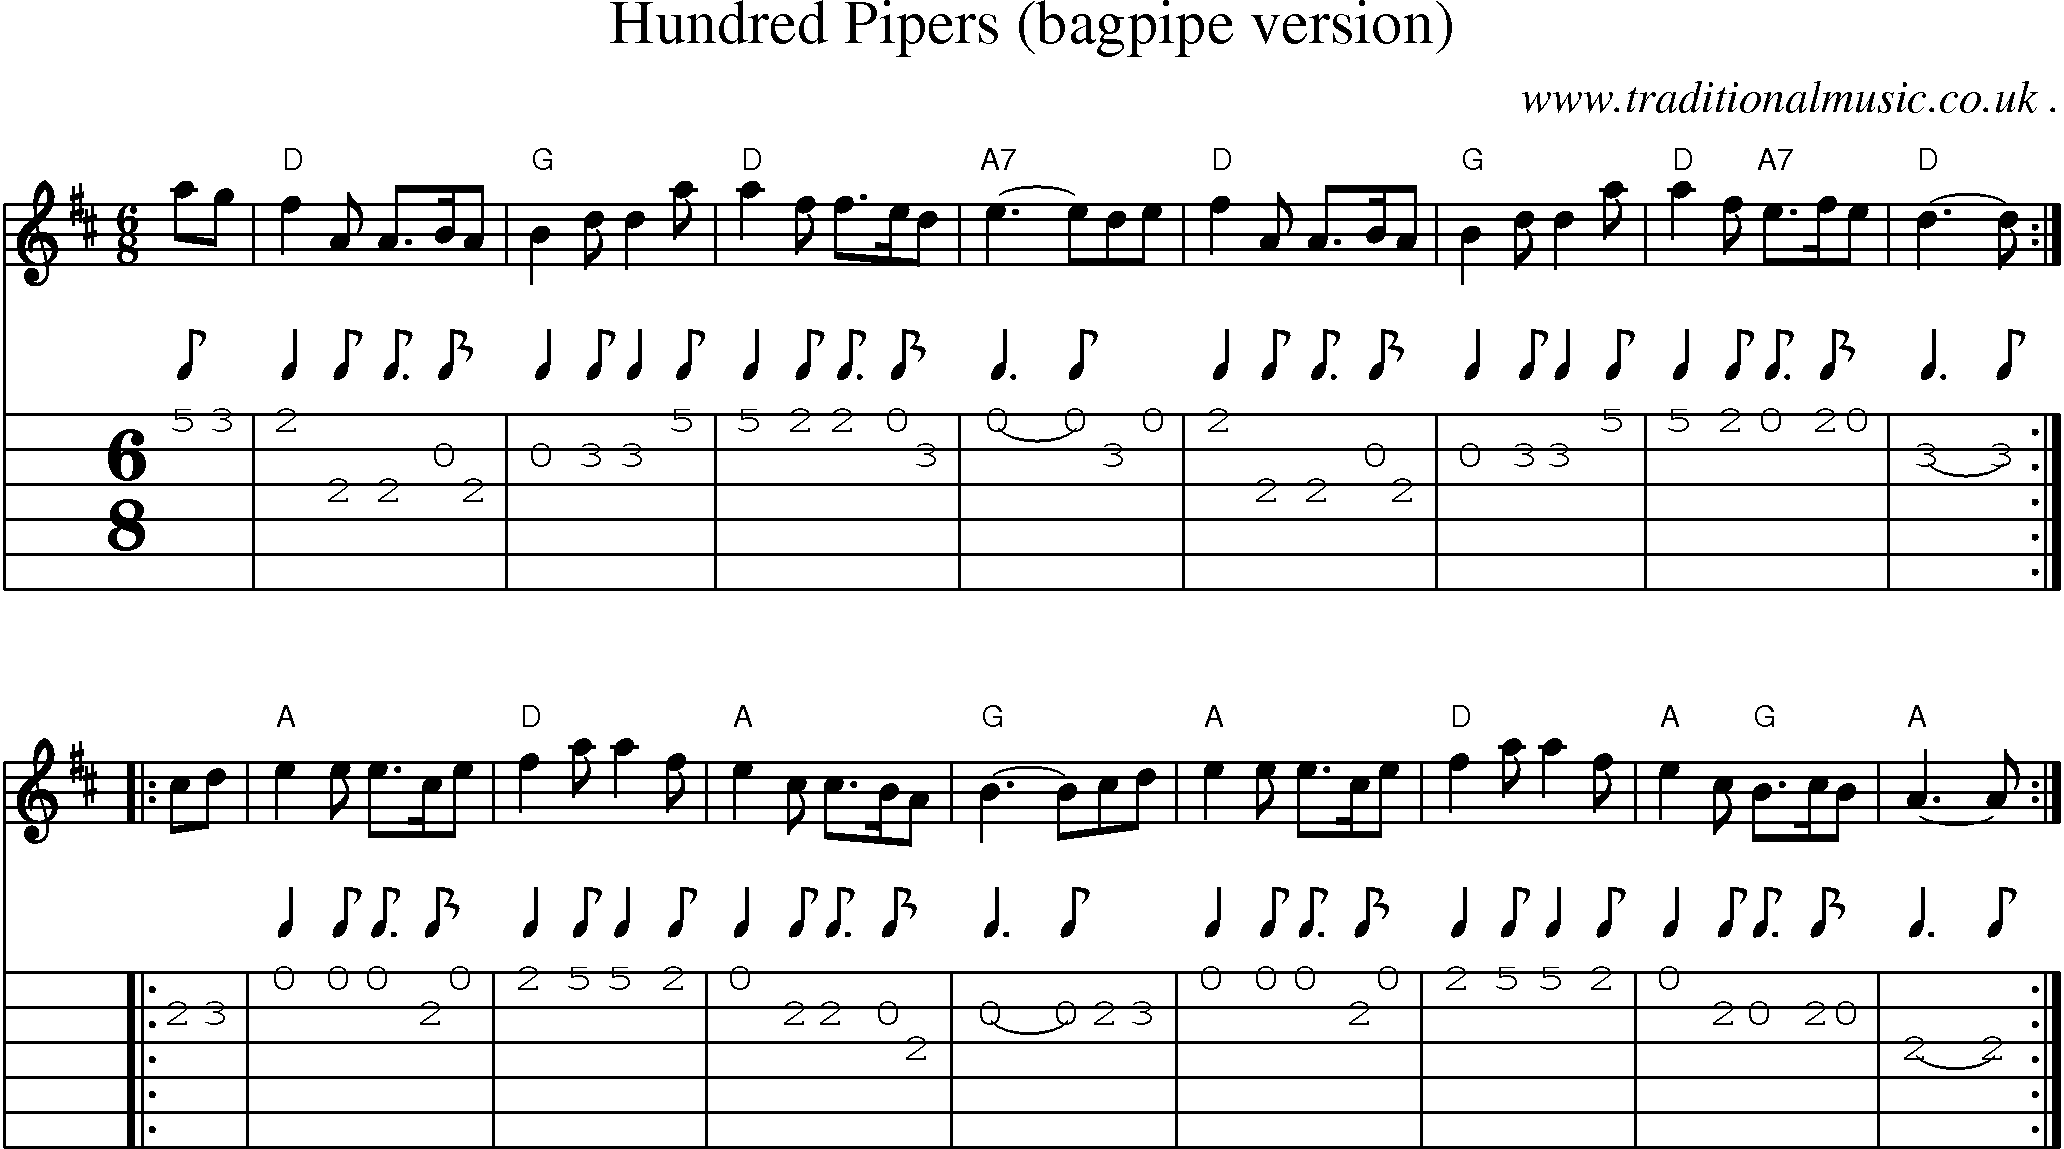 Sheet-music  score, Chords and Guitar Tabs for Hundred Pipers Bagpipe Version